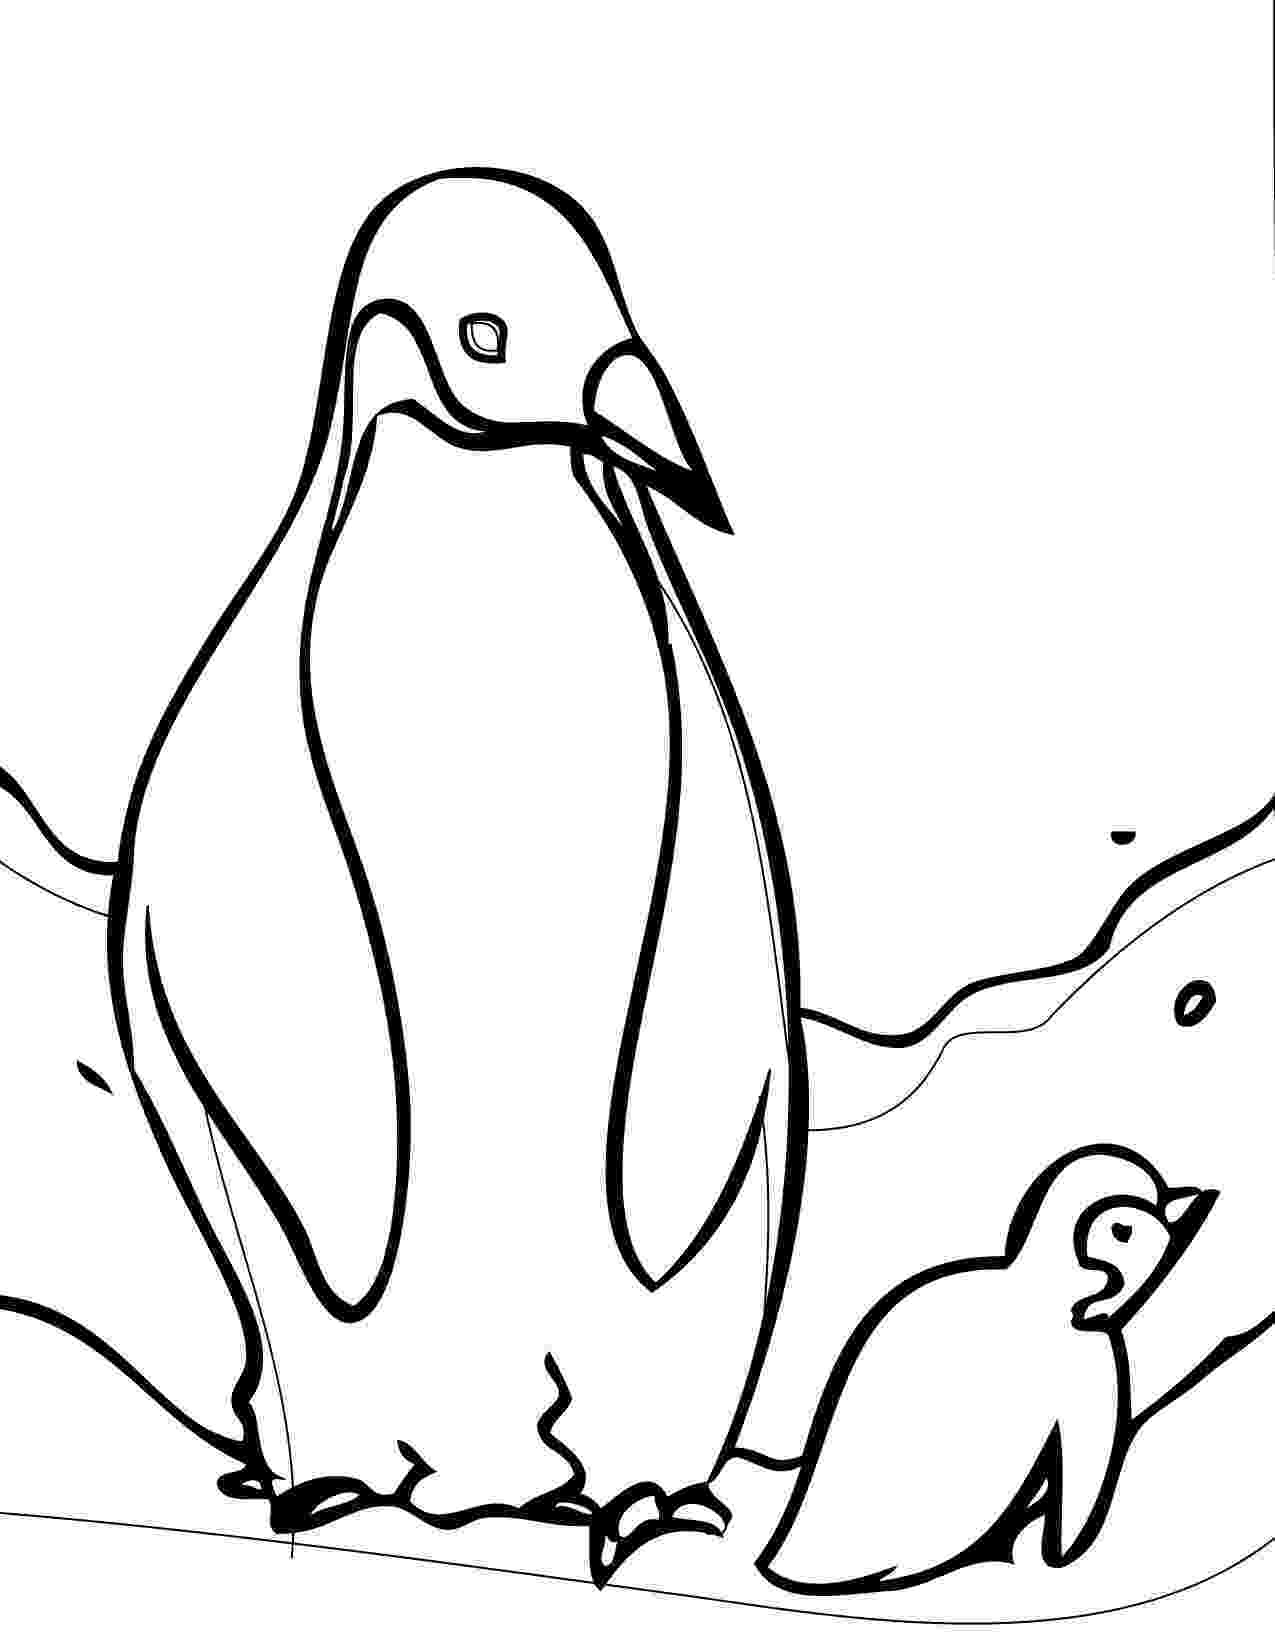 penguin pictures to print cute penguin coloring pages at getcoloringscom free penguin to print pictures 